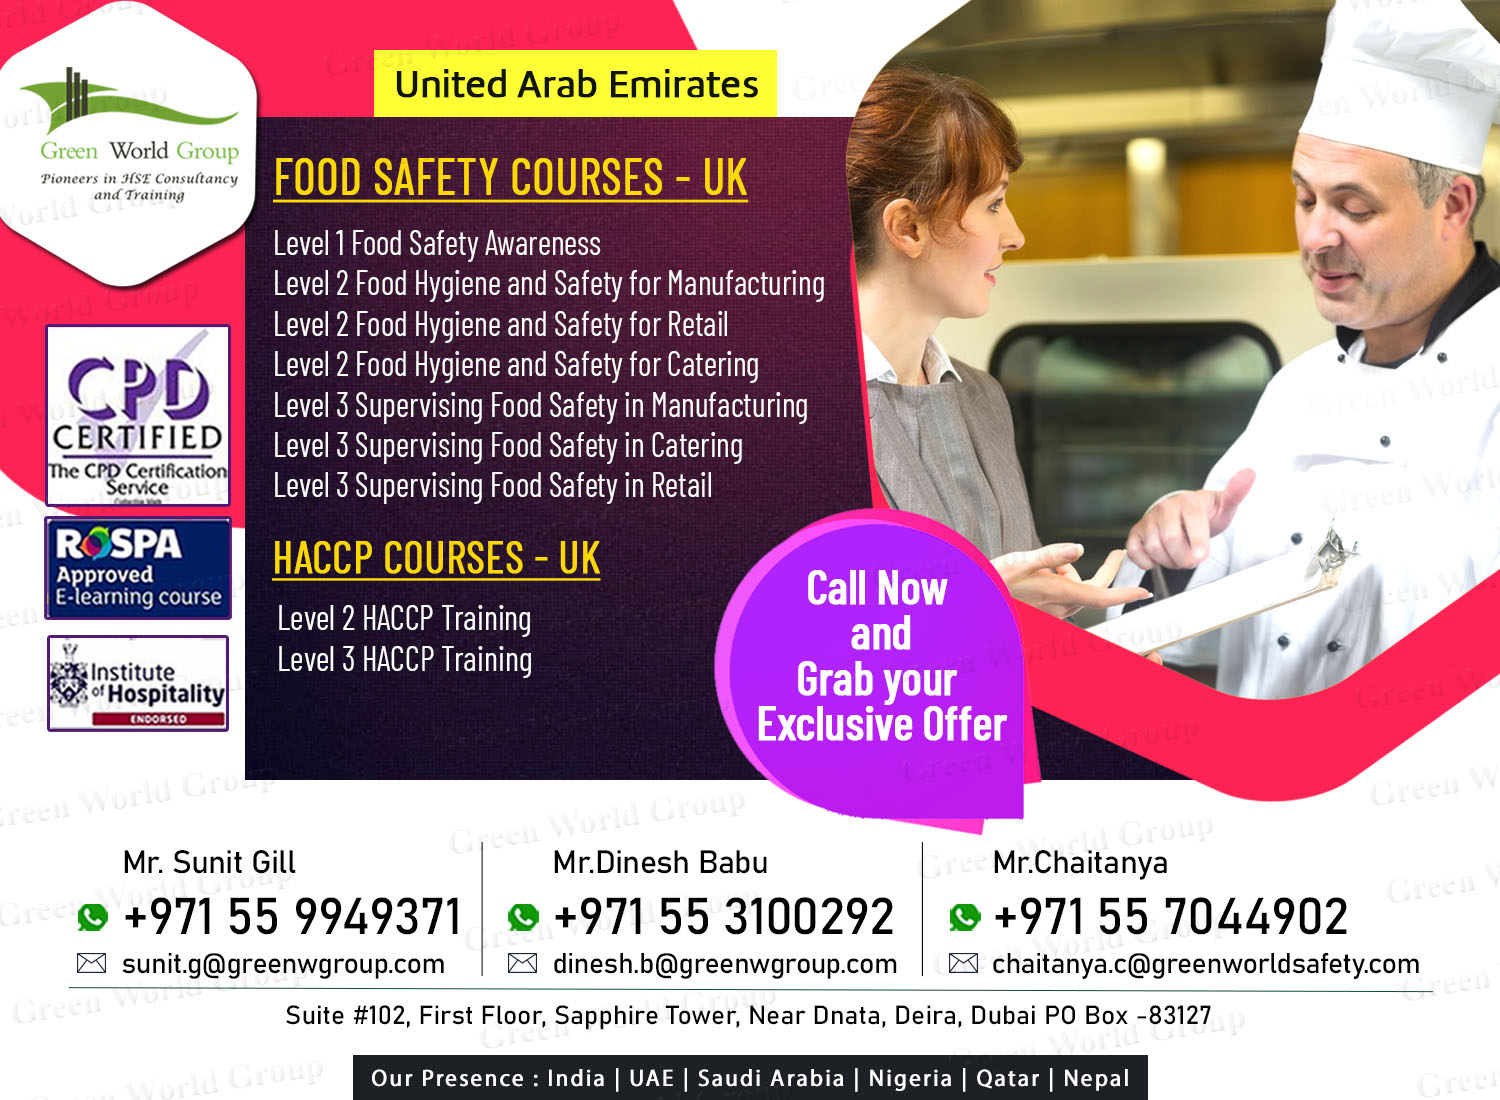 Food Safety Courses - UK copy-Recovered